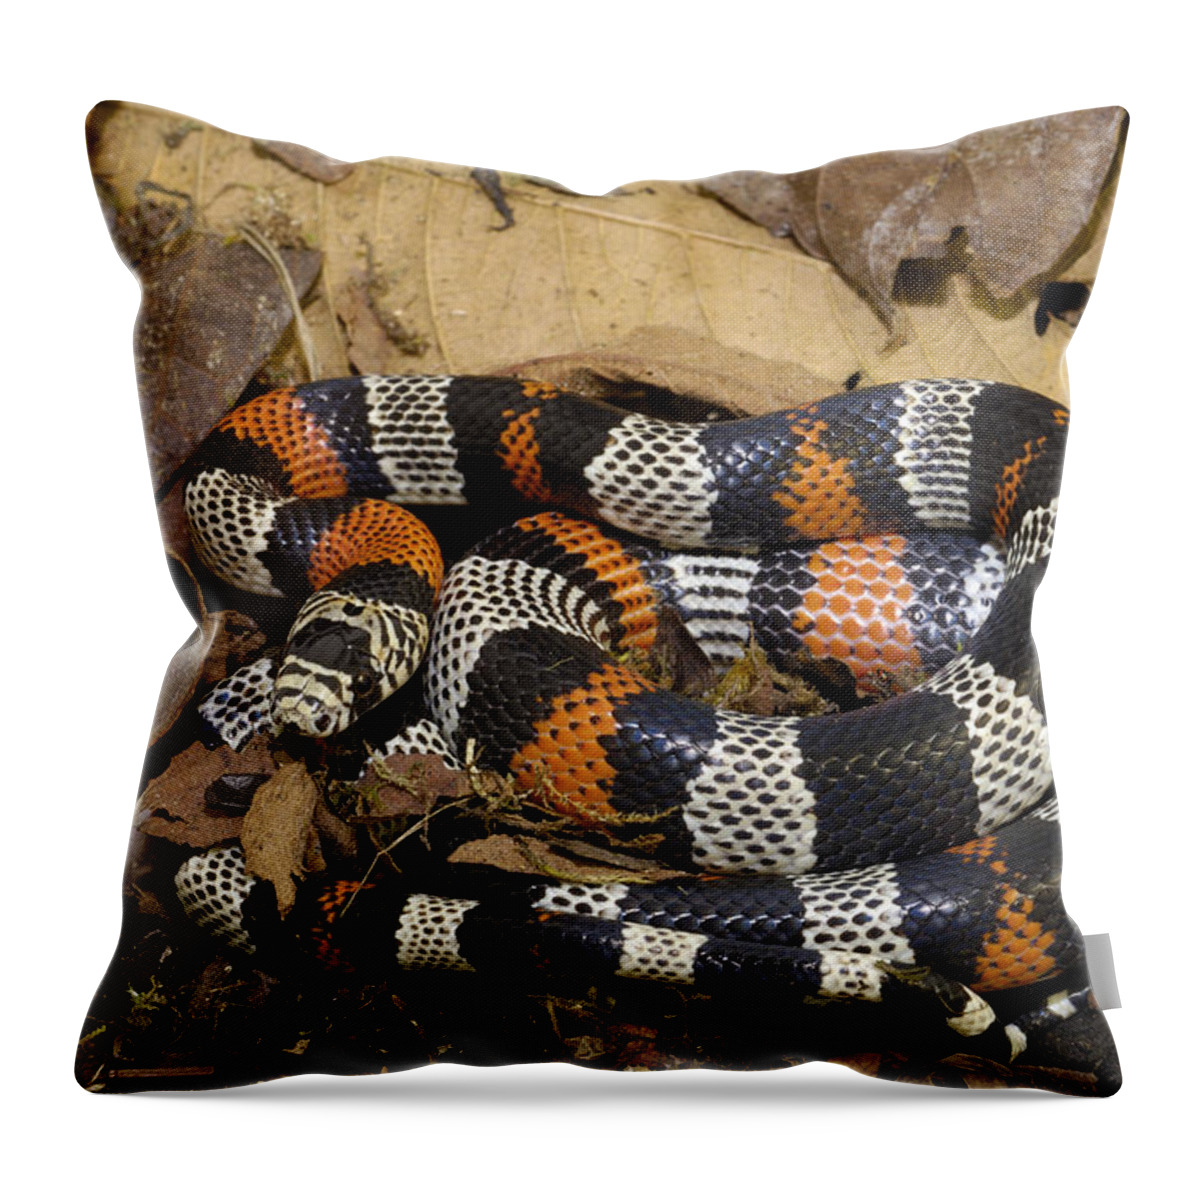 Mp Throw Pillow featuring the photograph Milk Snake Lampropeltis Triangulum by Pete Oxford